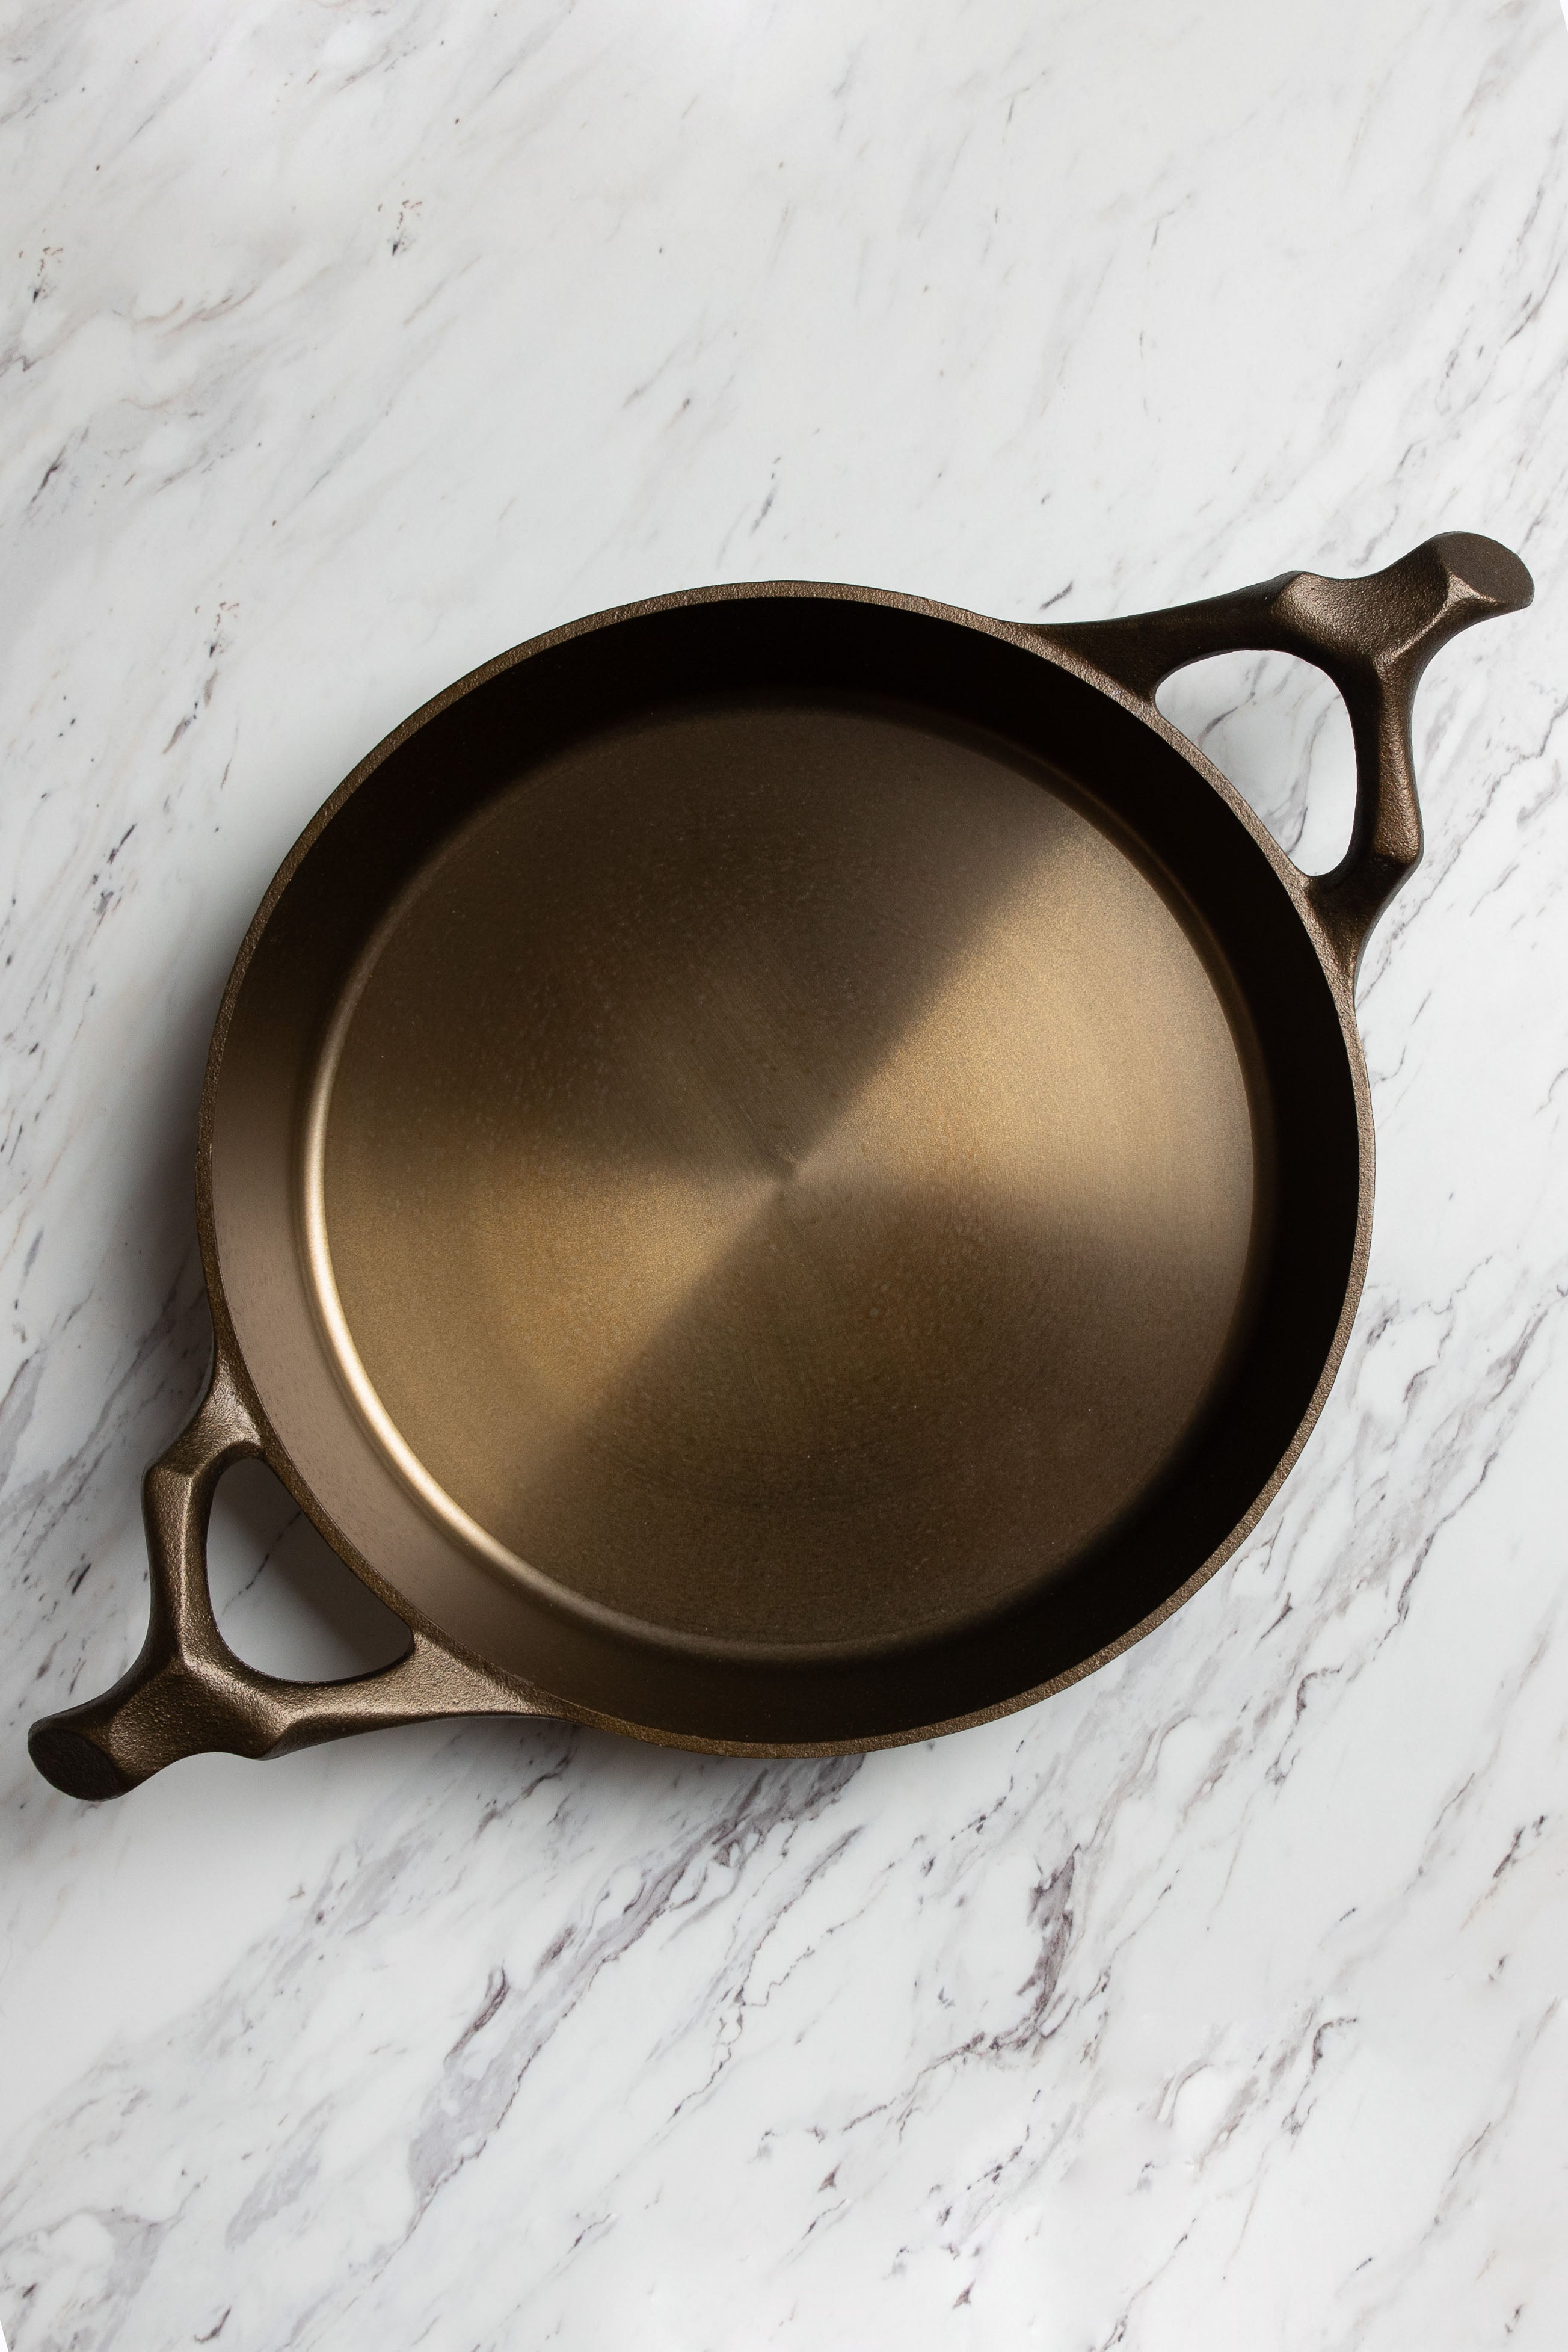 Cast Iron 12 Inch Braising Pan with Lid - Bed Bath & Beyond - 31481405